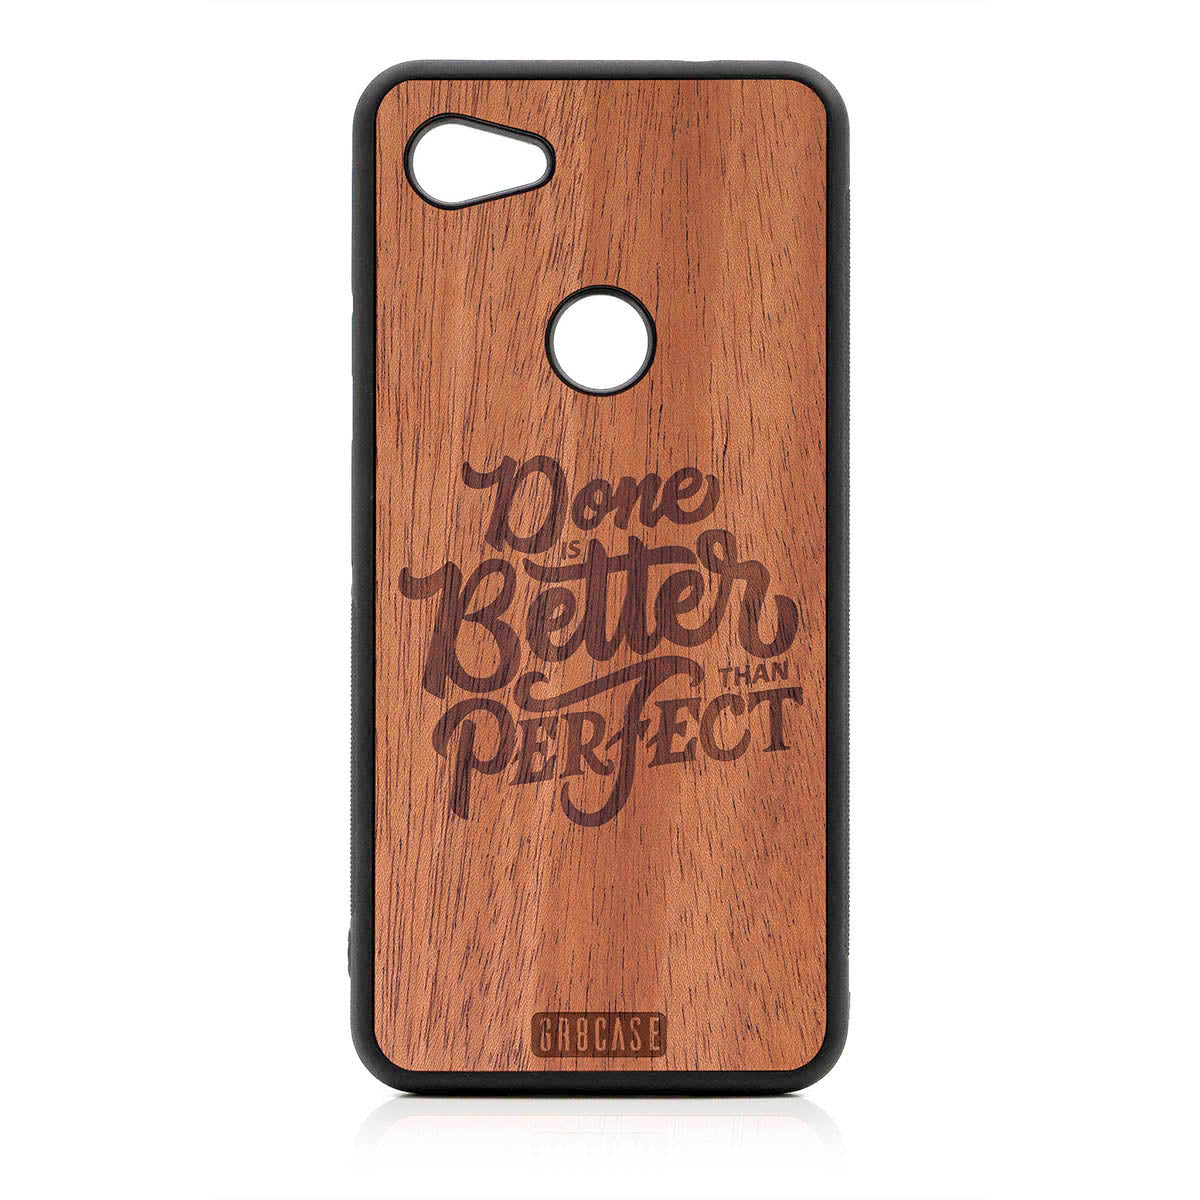 Done Is Better Than Perfect Design Wood Case For Google Pixel 3A by GR8CASE